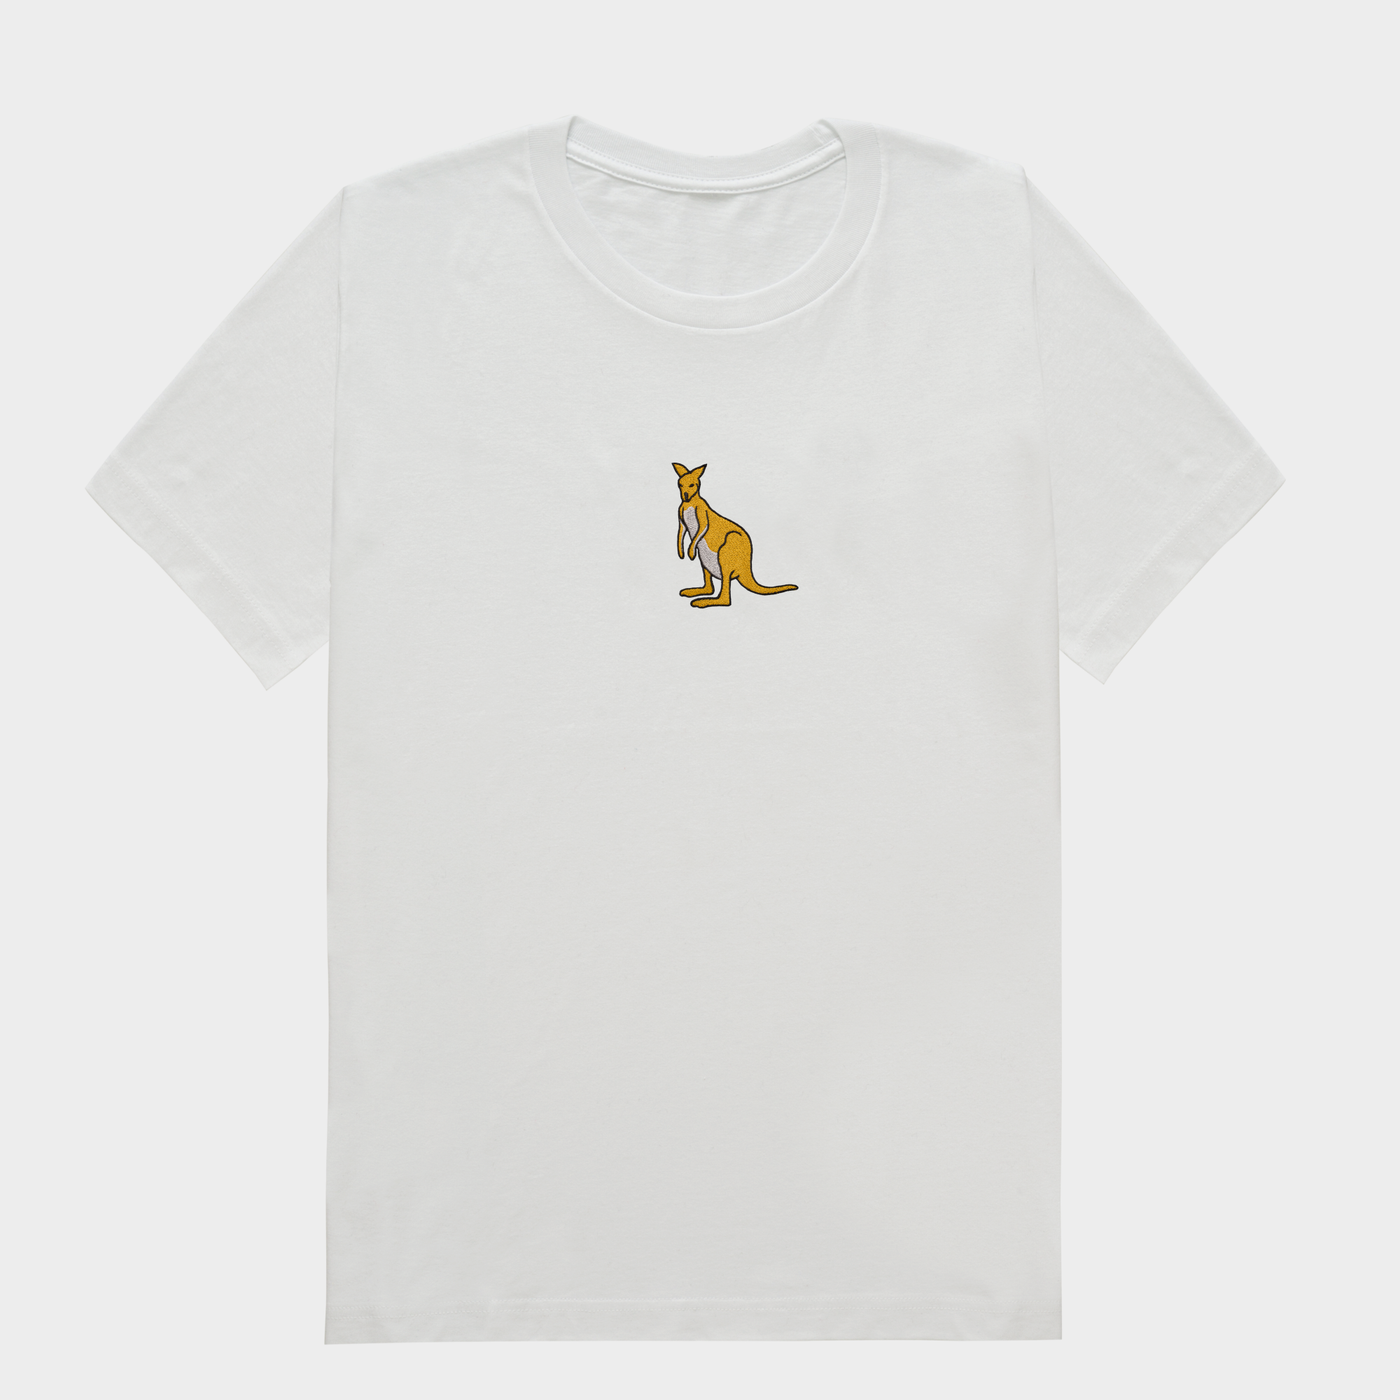 Bobby's Planet Men's Embroidered Kangaroo T-Shirt from Australia Down Under Animals Collection in White Color#color_white